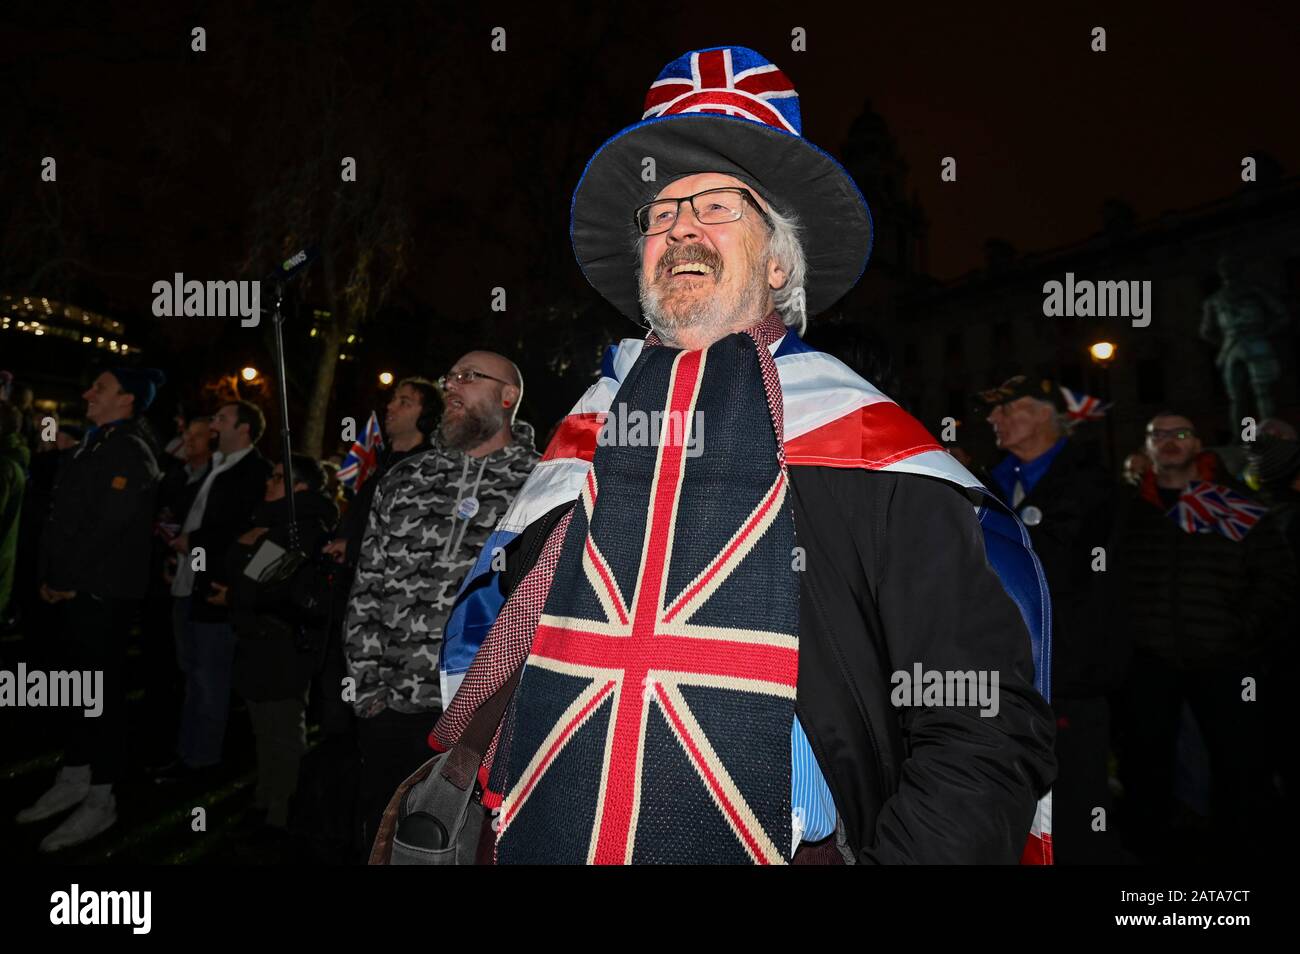 London, Britain. 31st Jan, 2020. Pro-Brexit supporters celebrate Brexit at a gathering at Parliament Square, in London, Britain, on Jan. 31, 2020. Britain officially left the European Union (EU) at 11 p.m. (2300 GMT) Friday, putting an end to its 47-year-long membership of the world's largest trading bloc. Credit: Stephen Chung/Xinhua/Alamy Live News Stock Photo